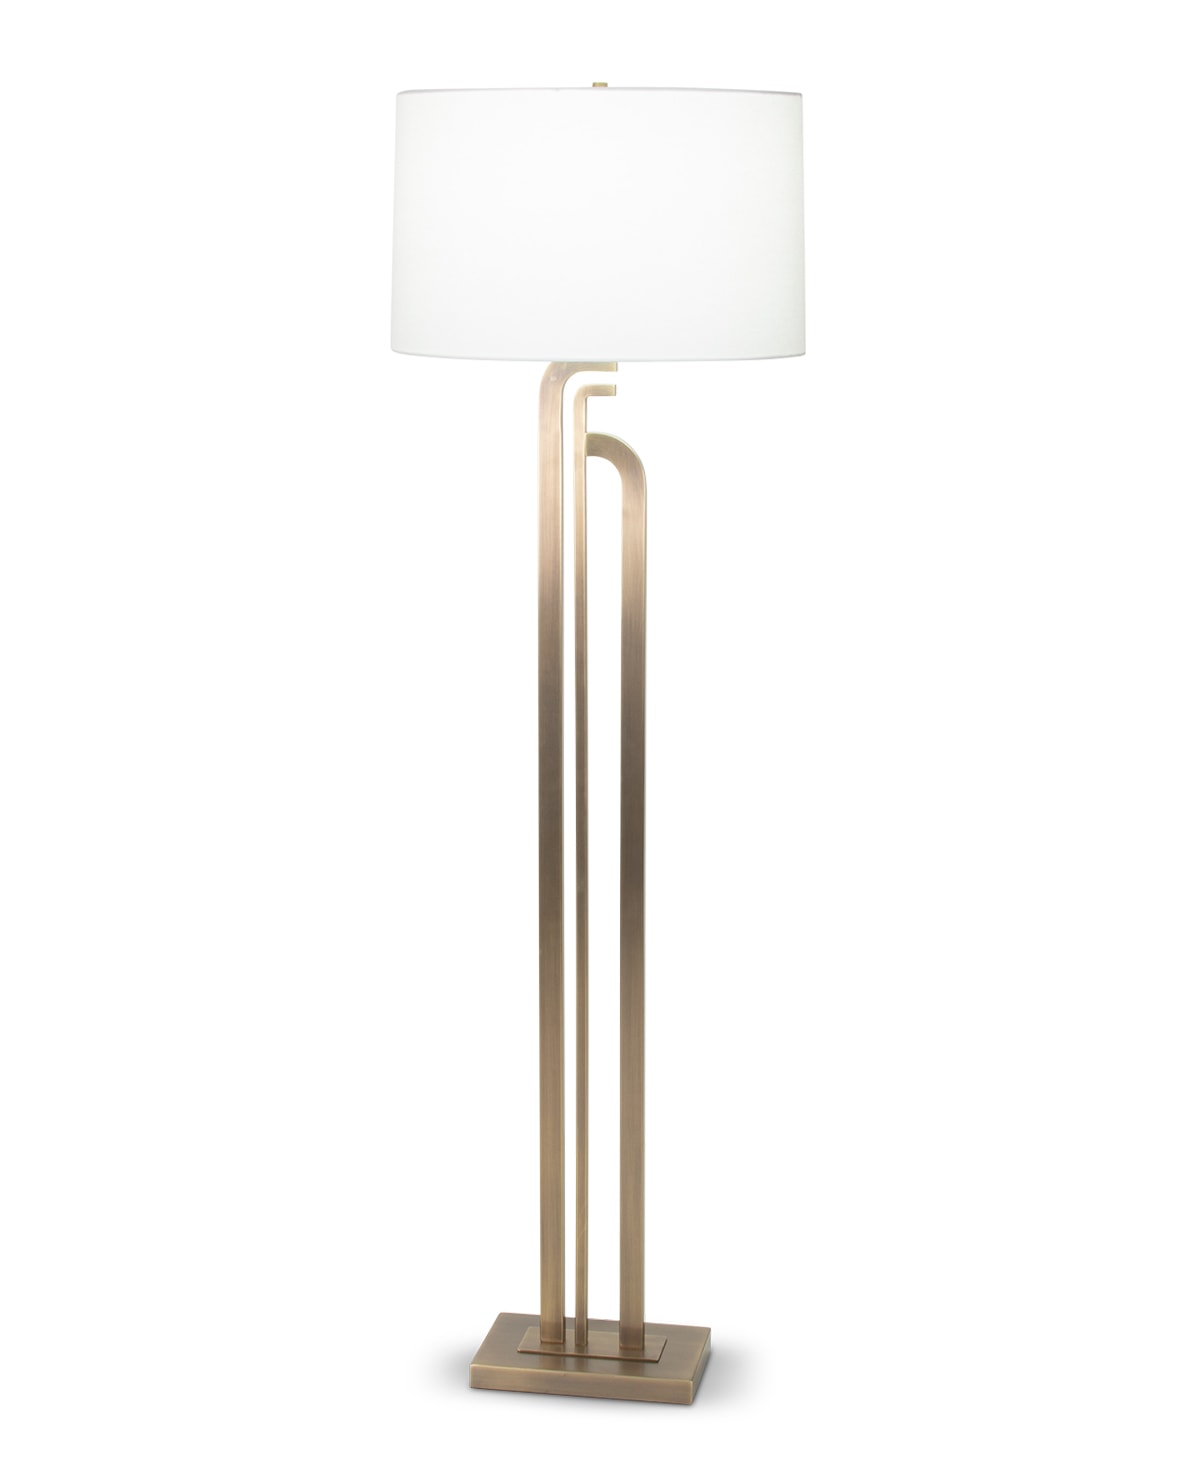 FlowDecor Caspian Floor Lamp in metal with antique brass finish and off-white linen oval shade (# 4088)